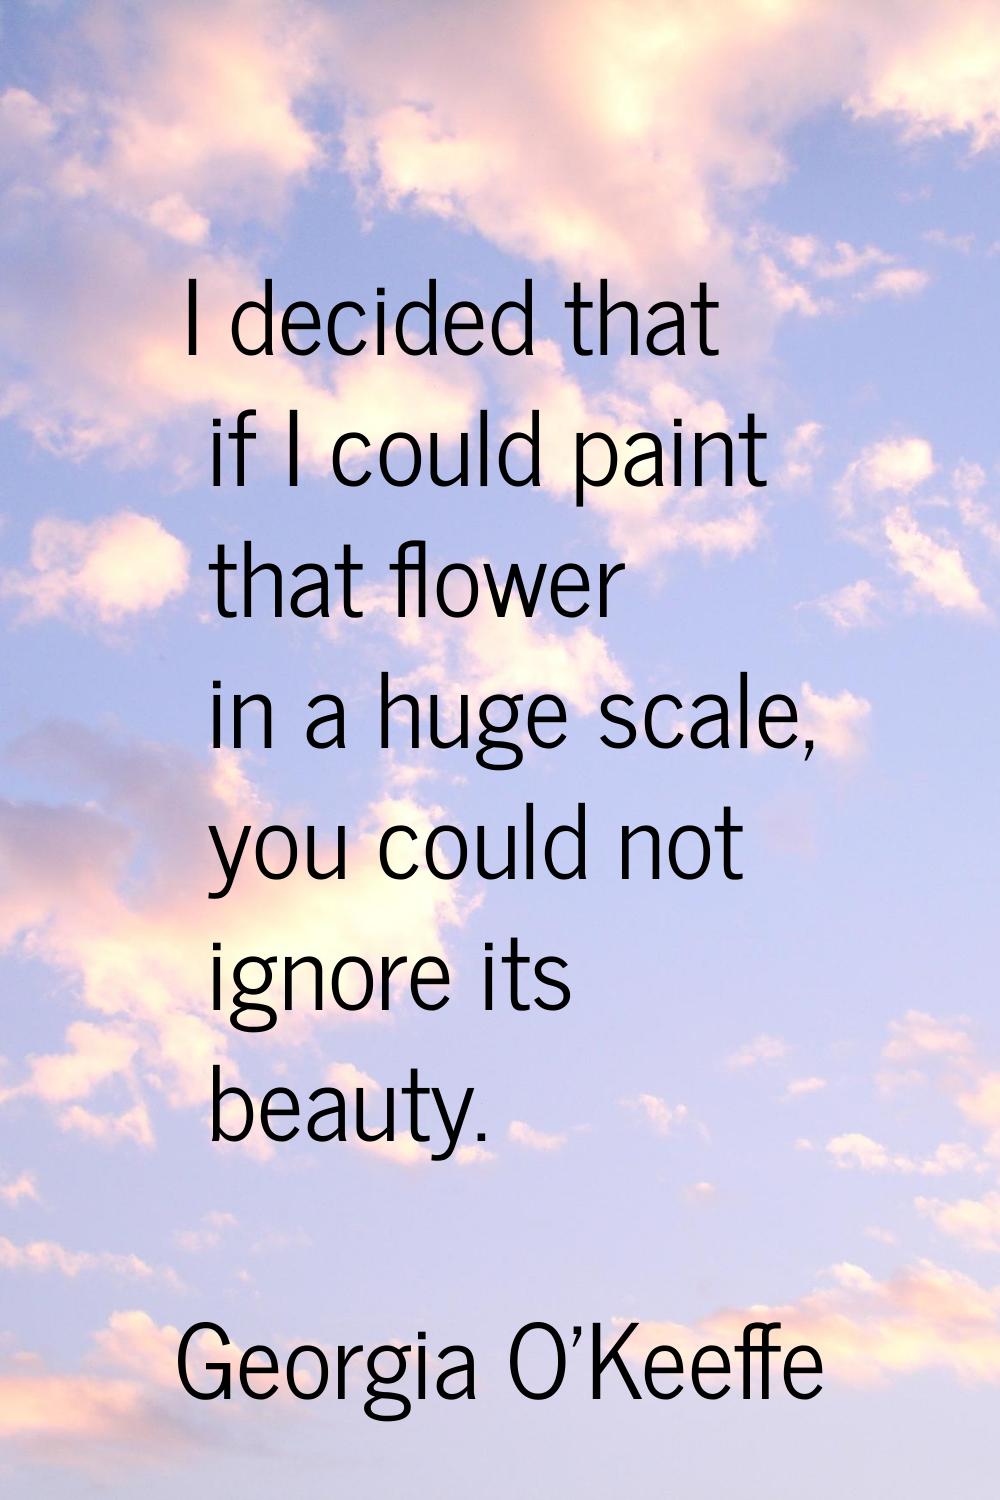 I decided that if I could paint that flower in a huge scale, you could not ignore its beauty.